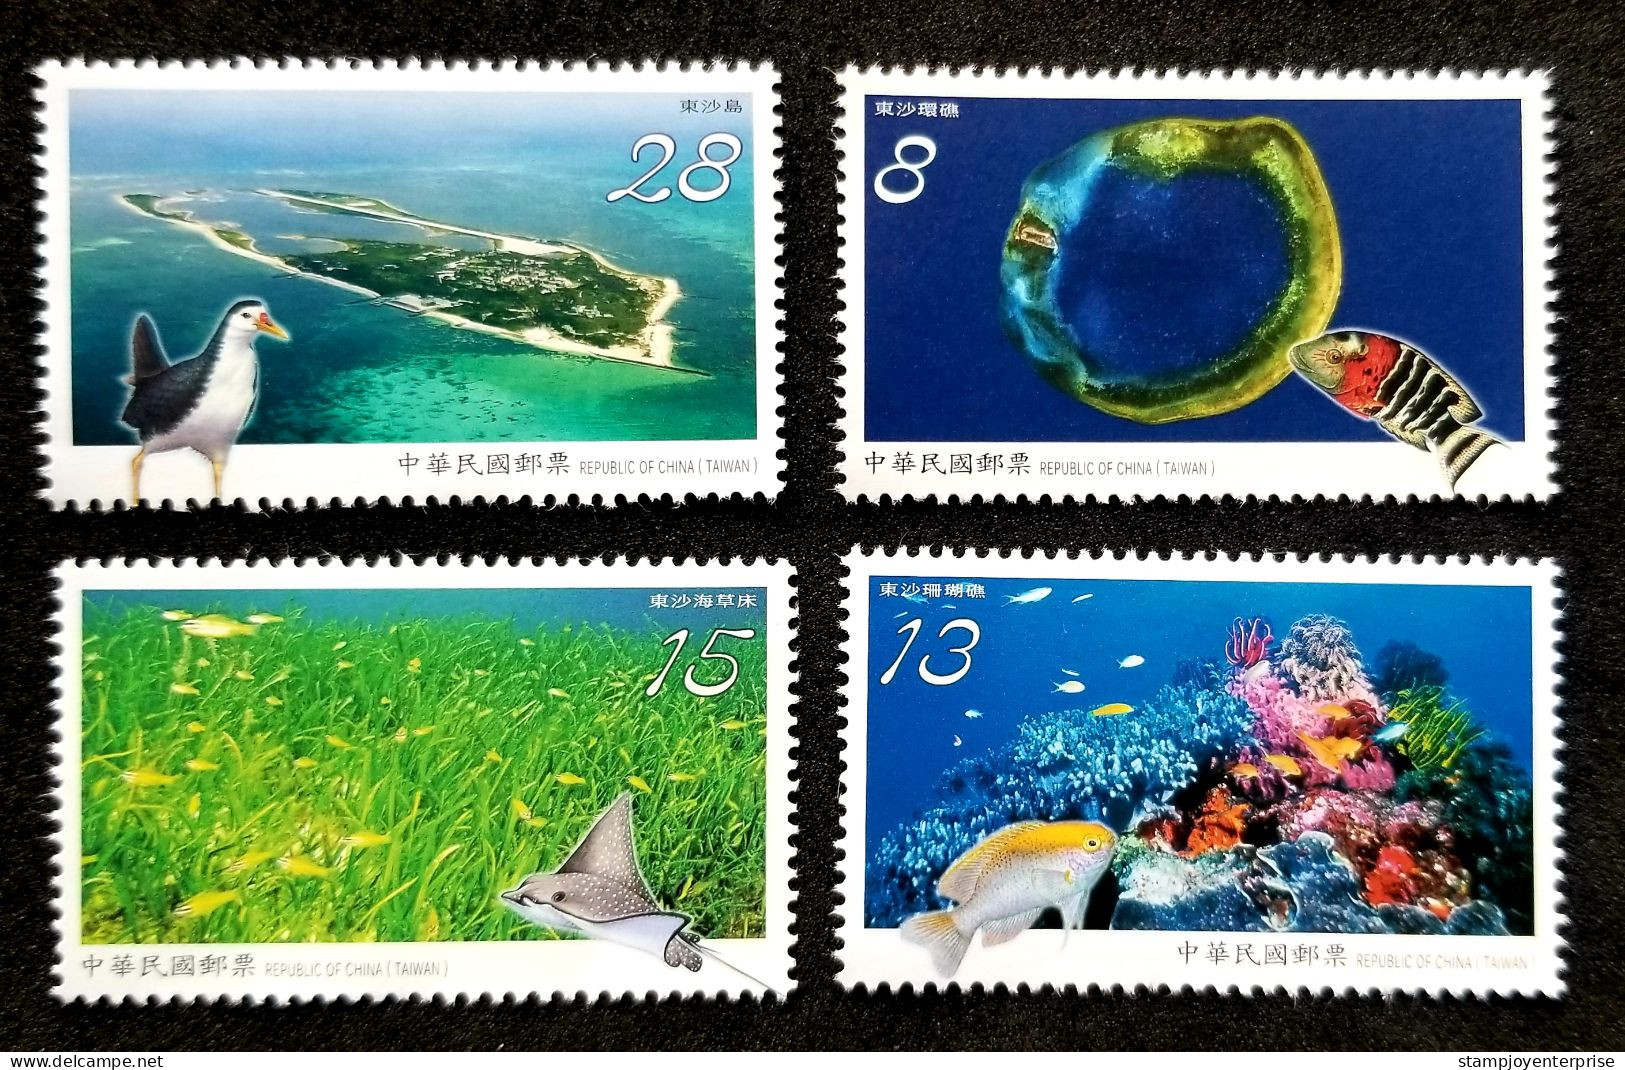 Taiwan Dongsha Atoll National Park 2019 Bird Ray Fish Marine Life Coral Reef Corals Underwater (stamp) MNH - Neufs